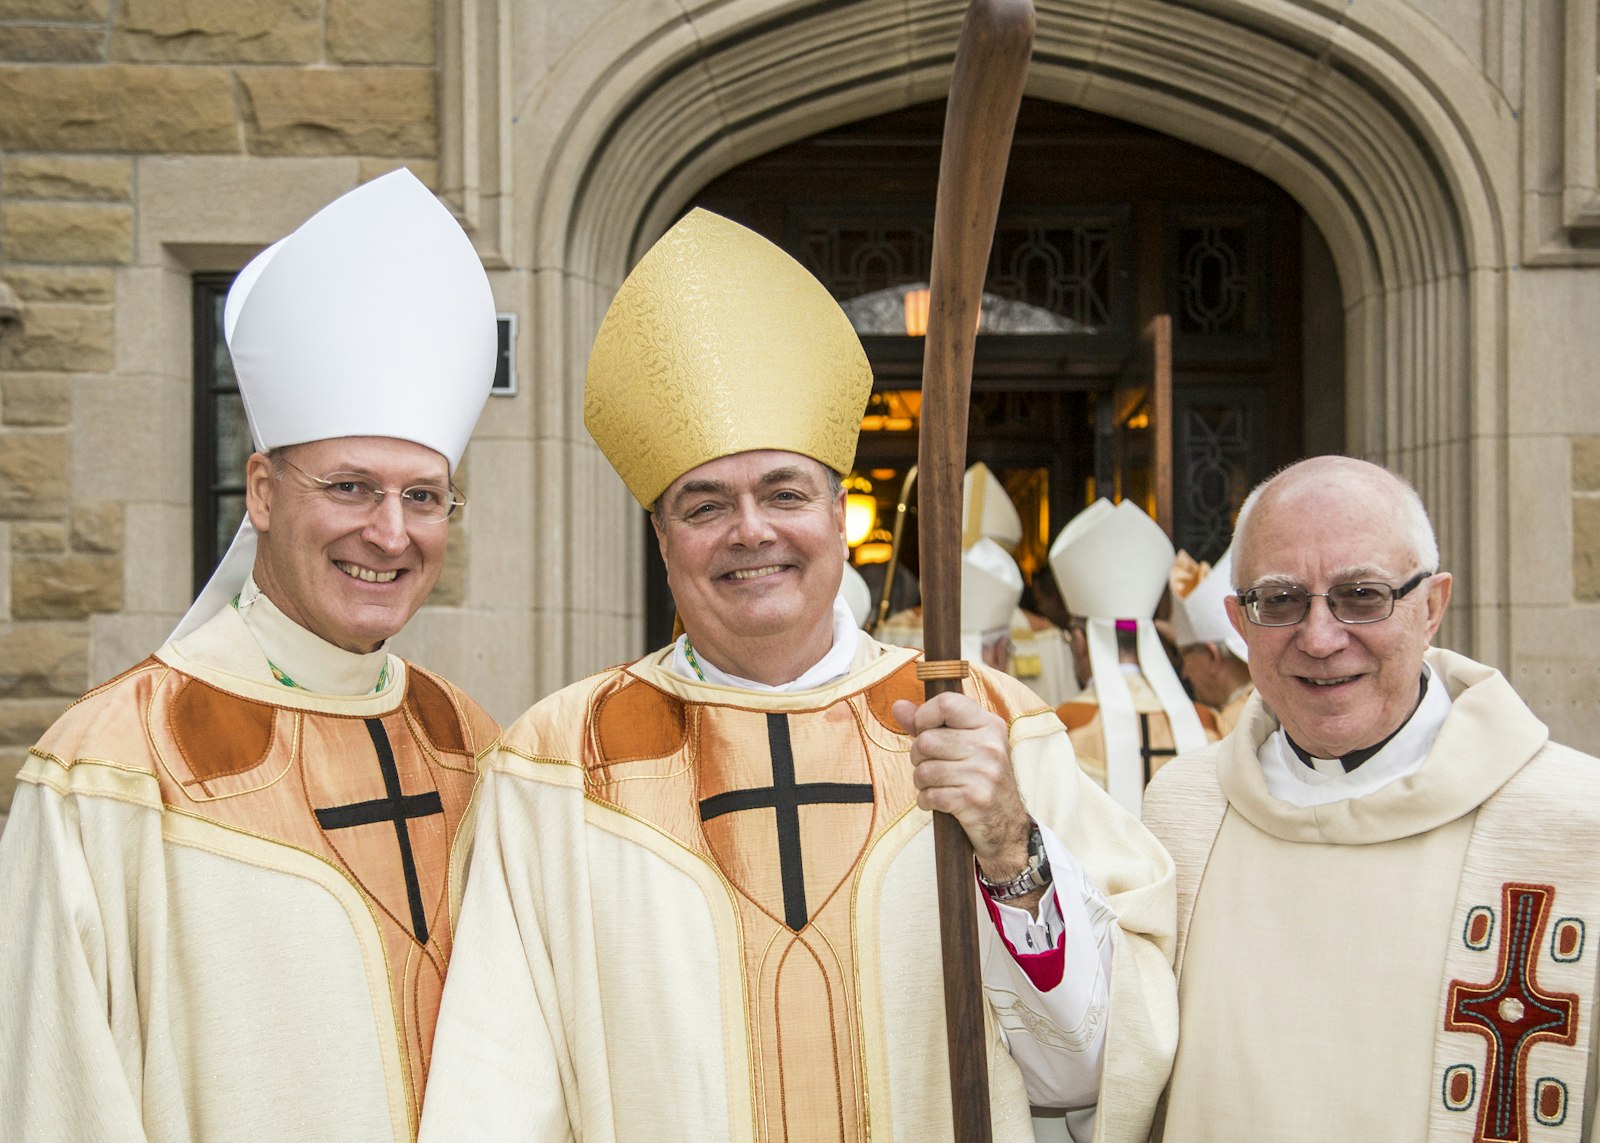 Archbishop Russell, left, is pictured with current Detroit Auxiliary Bishop Robert J. Fisher, center, and Fr. Ed Zaorski, current pastor of St. James Parish in Novi, during the episcopal ordination of Bishop Fisher and Auxiliary Bishop Gerard W. Battersby on Jan. 25, 2017, at the Cathedral of the Most Blessed Sacrament in Detroit. The three have been close friends since they served together at the Archdiocese of Detroit's CYO camp in Port Sanilac as young seminarians in the 1980s. Archbishop Russell served as a co-consecrator at Bishop Fisher and Bishop Battersby's episcopal ordination. (Larry A. Peplin | Special to Detroit Catholic)